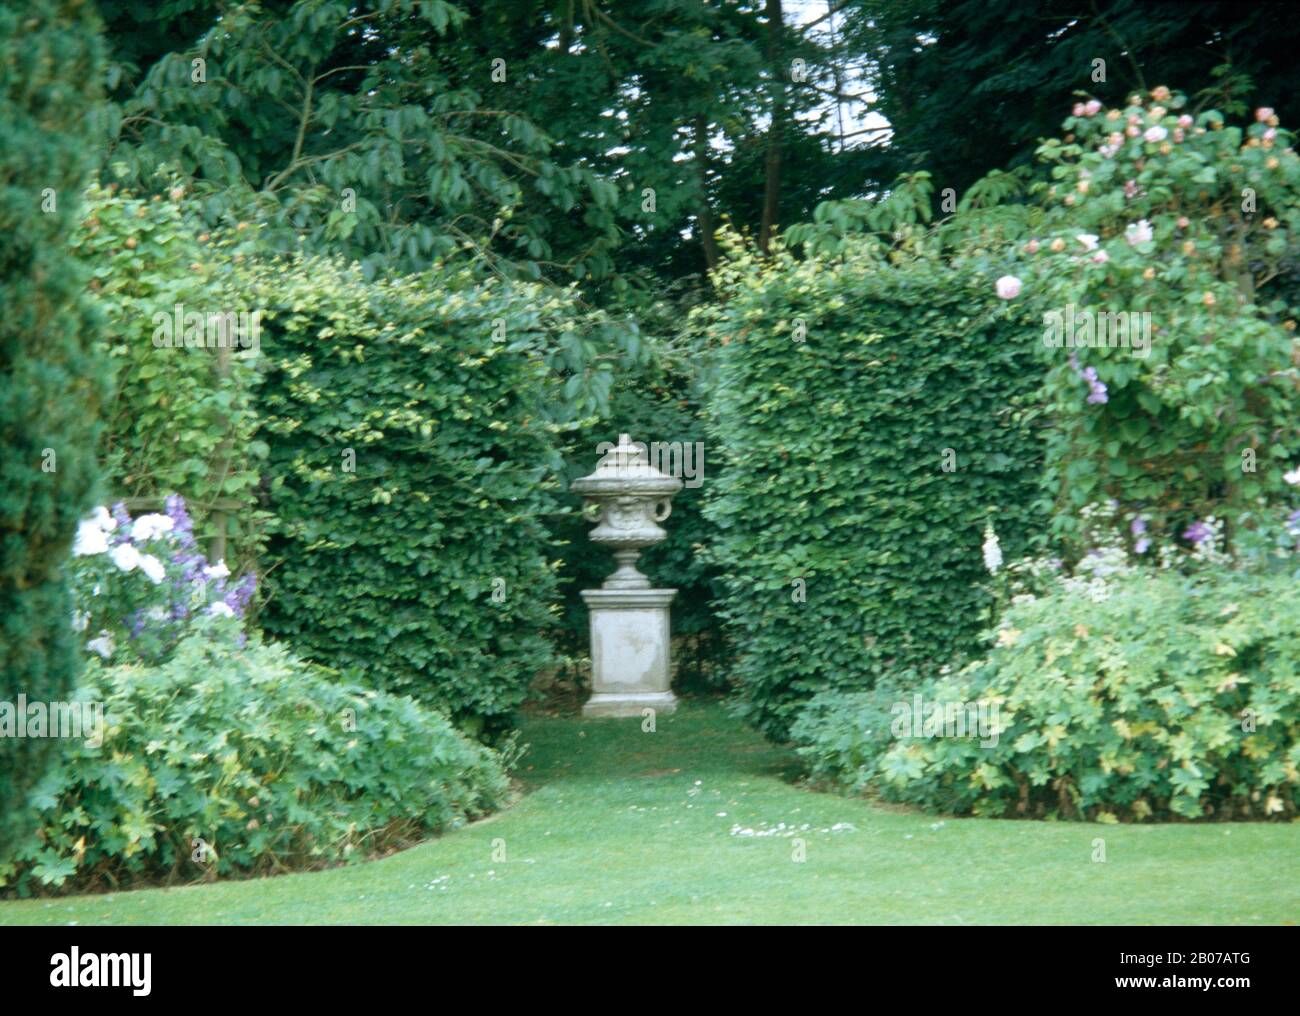 Sculpture placed in garden with large hedge Stock Photo